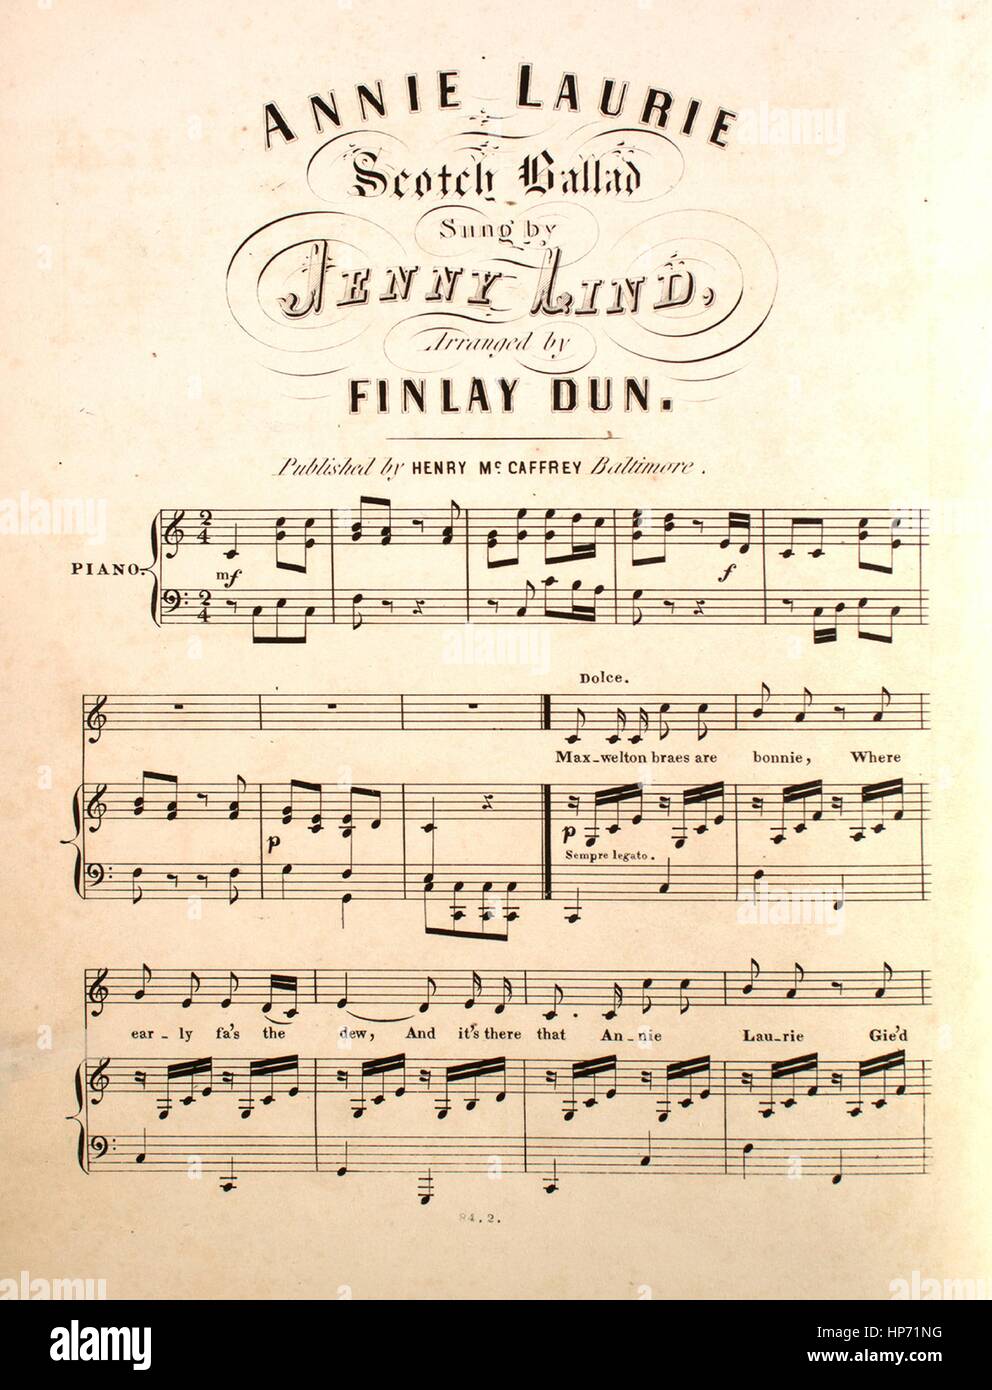 Sheet music cover image of the song 'Annie Laurie Scotch Ballad', with  original authorship notes reading 'Arranged by Finlay Dun', United States,  1900. The publisher is listed as 'Henry McCaffrey', the form